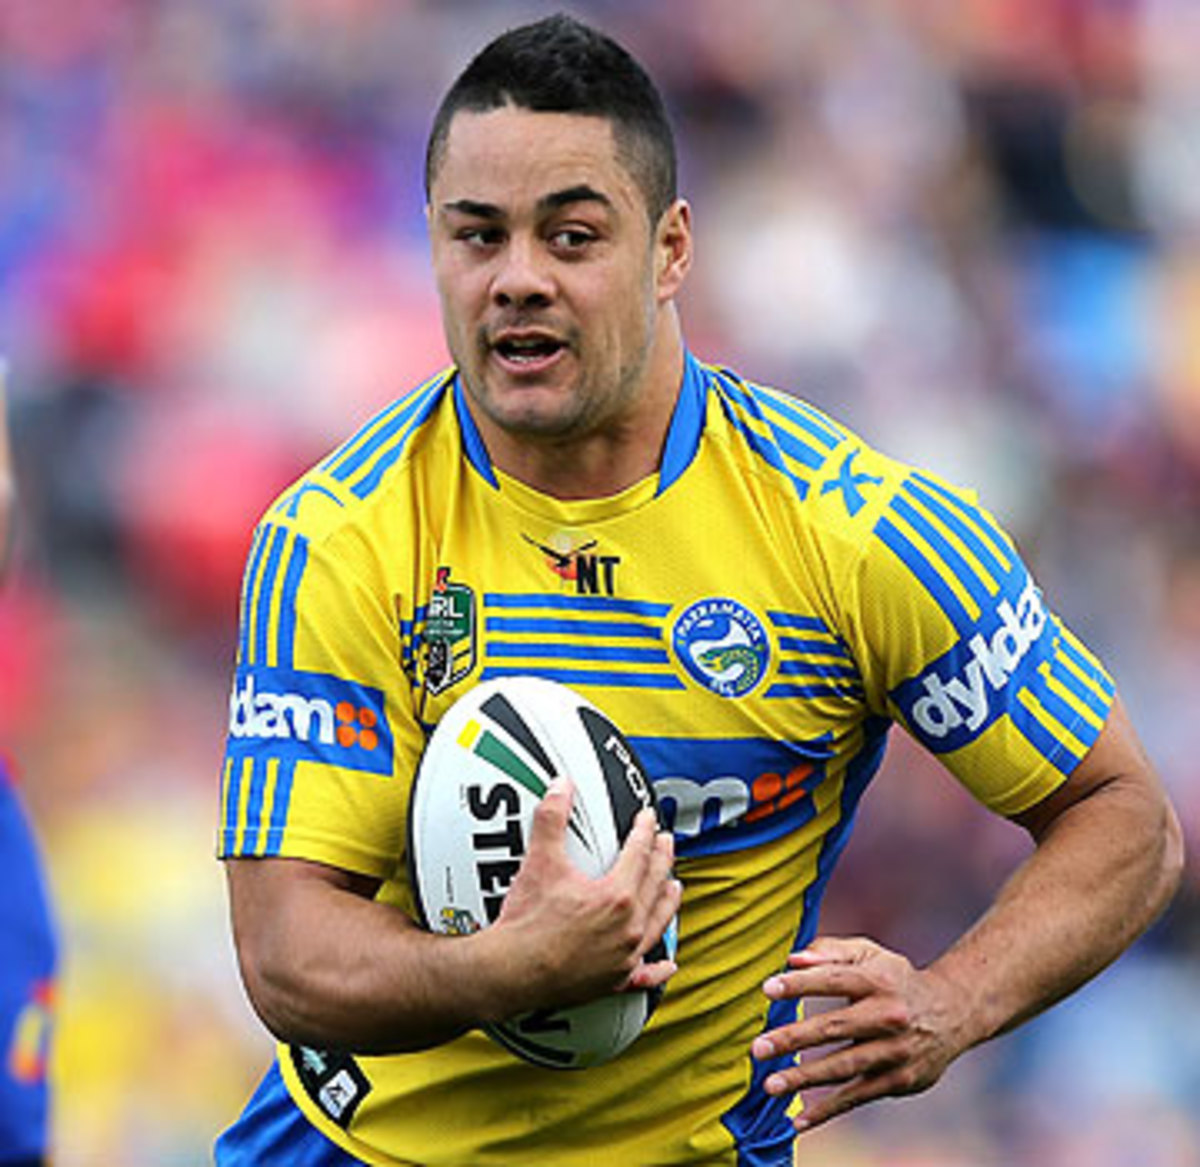 The 26-year-old Jarryd Hayne is 6-2 and 220 pounds and seeking a new career path in the NFL. (Ashley Feler/Getty Images)